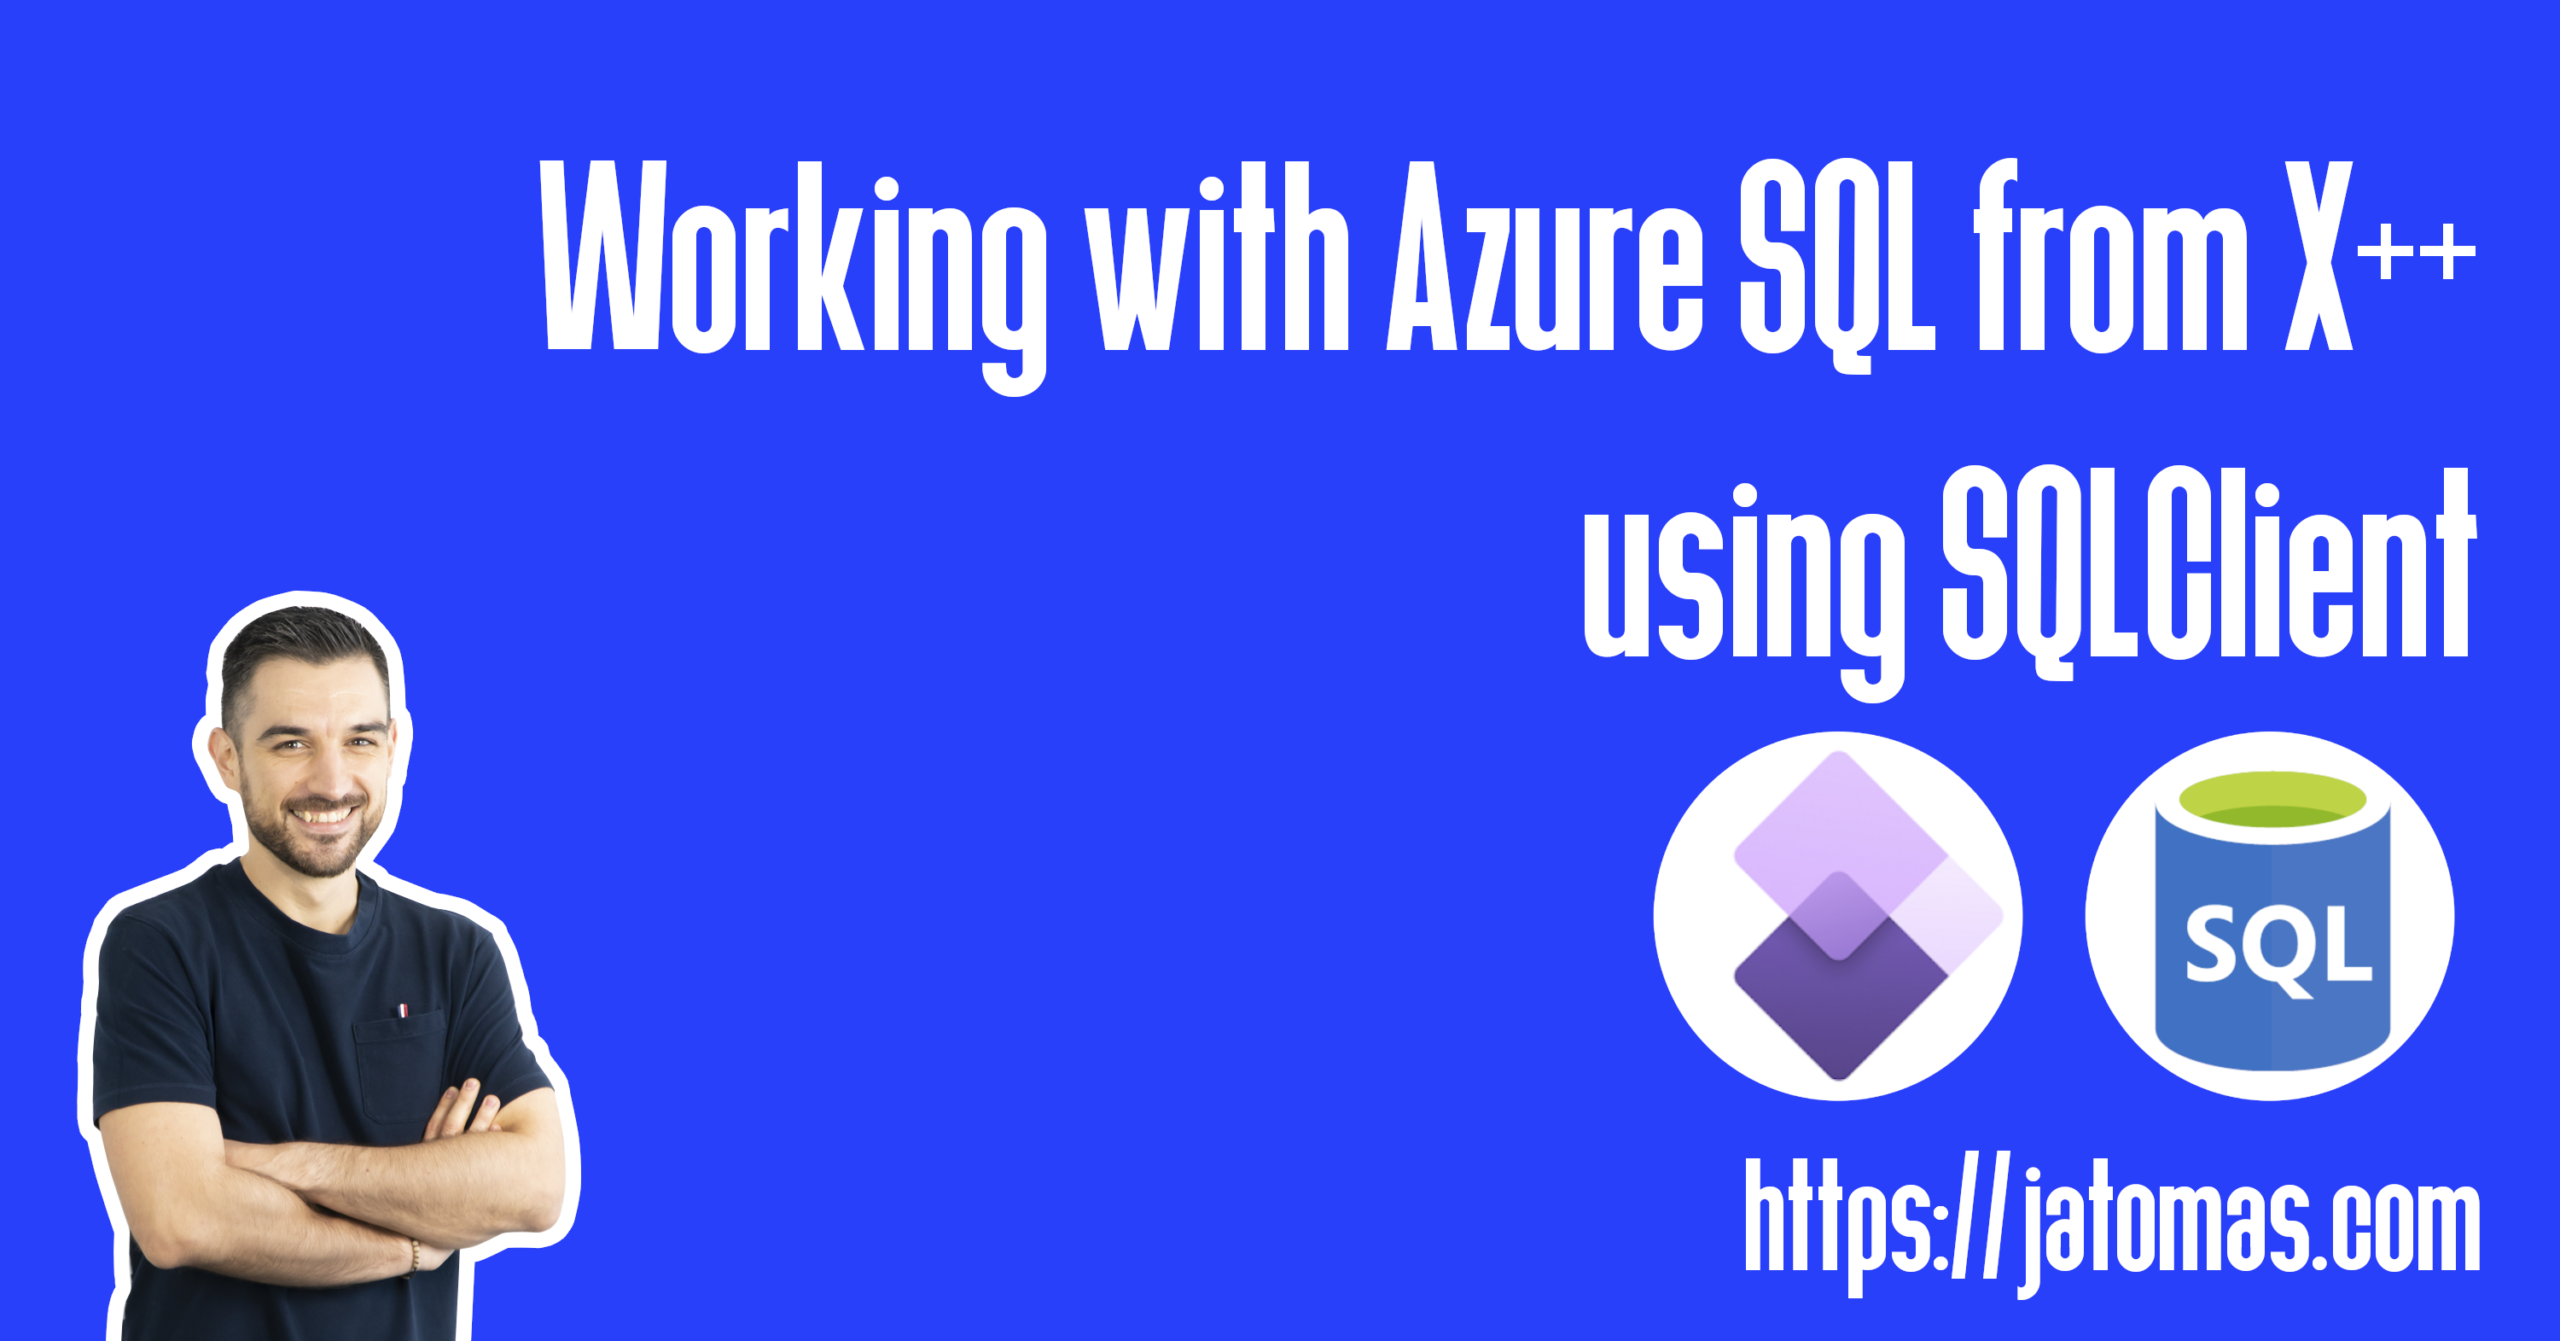 Working with Azure SQL from X++ using SQLClient